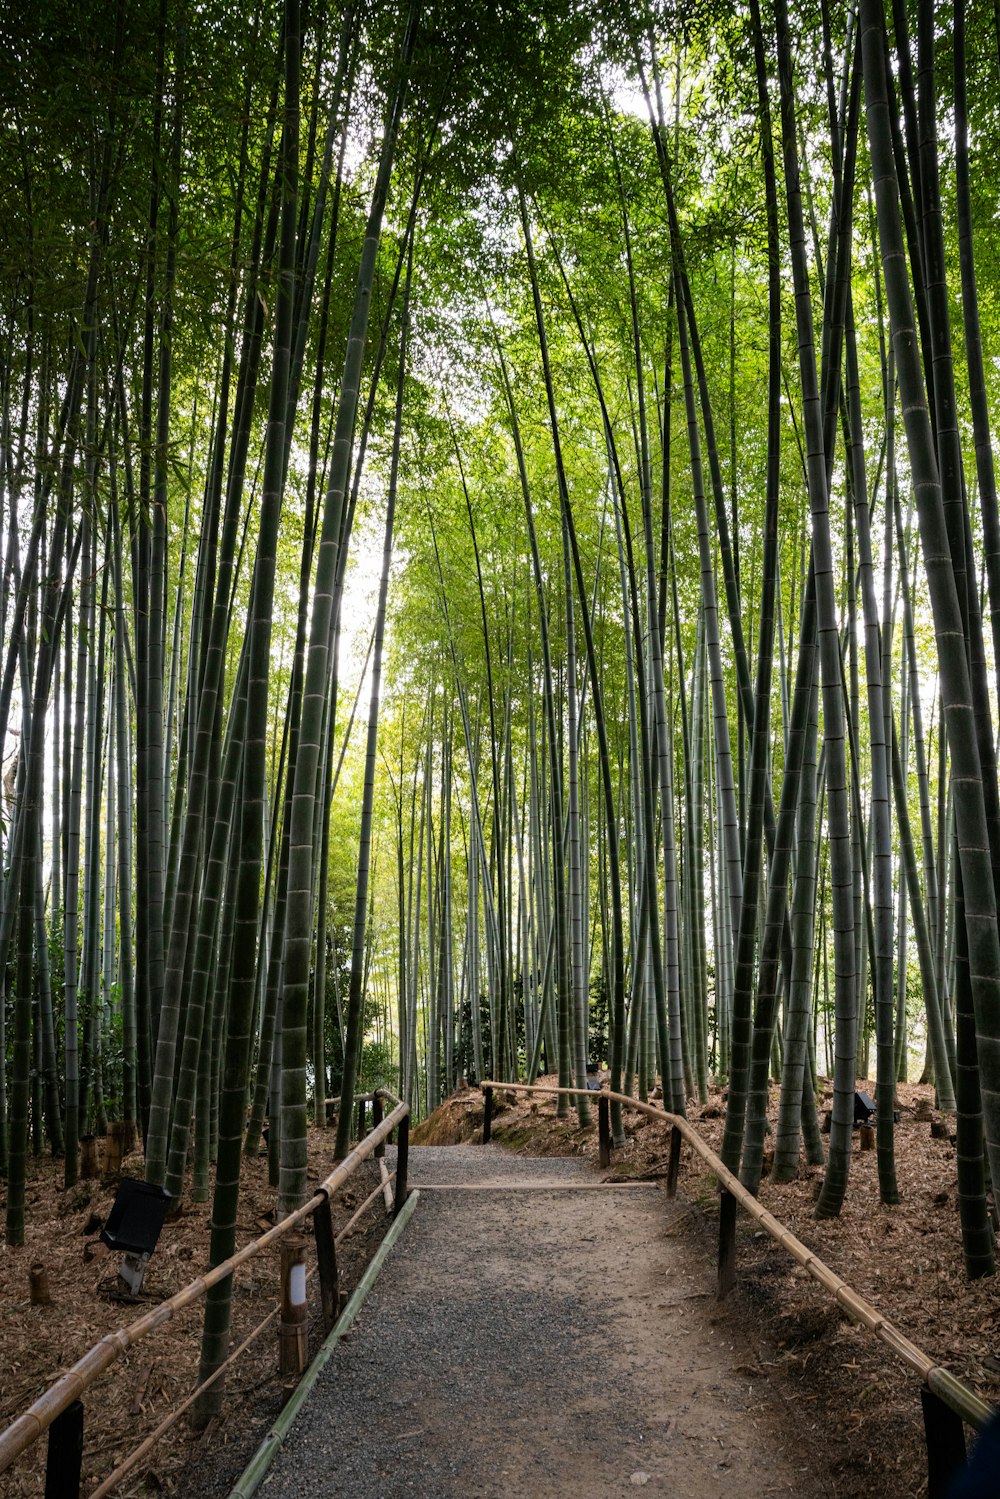 a path through a bamboo forest with lots of trees